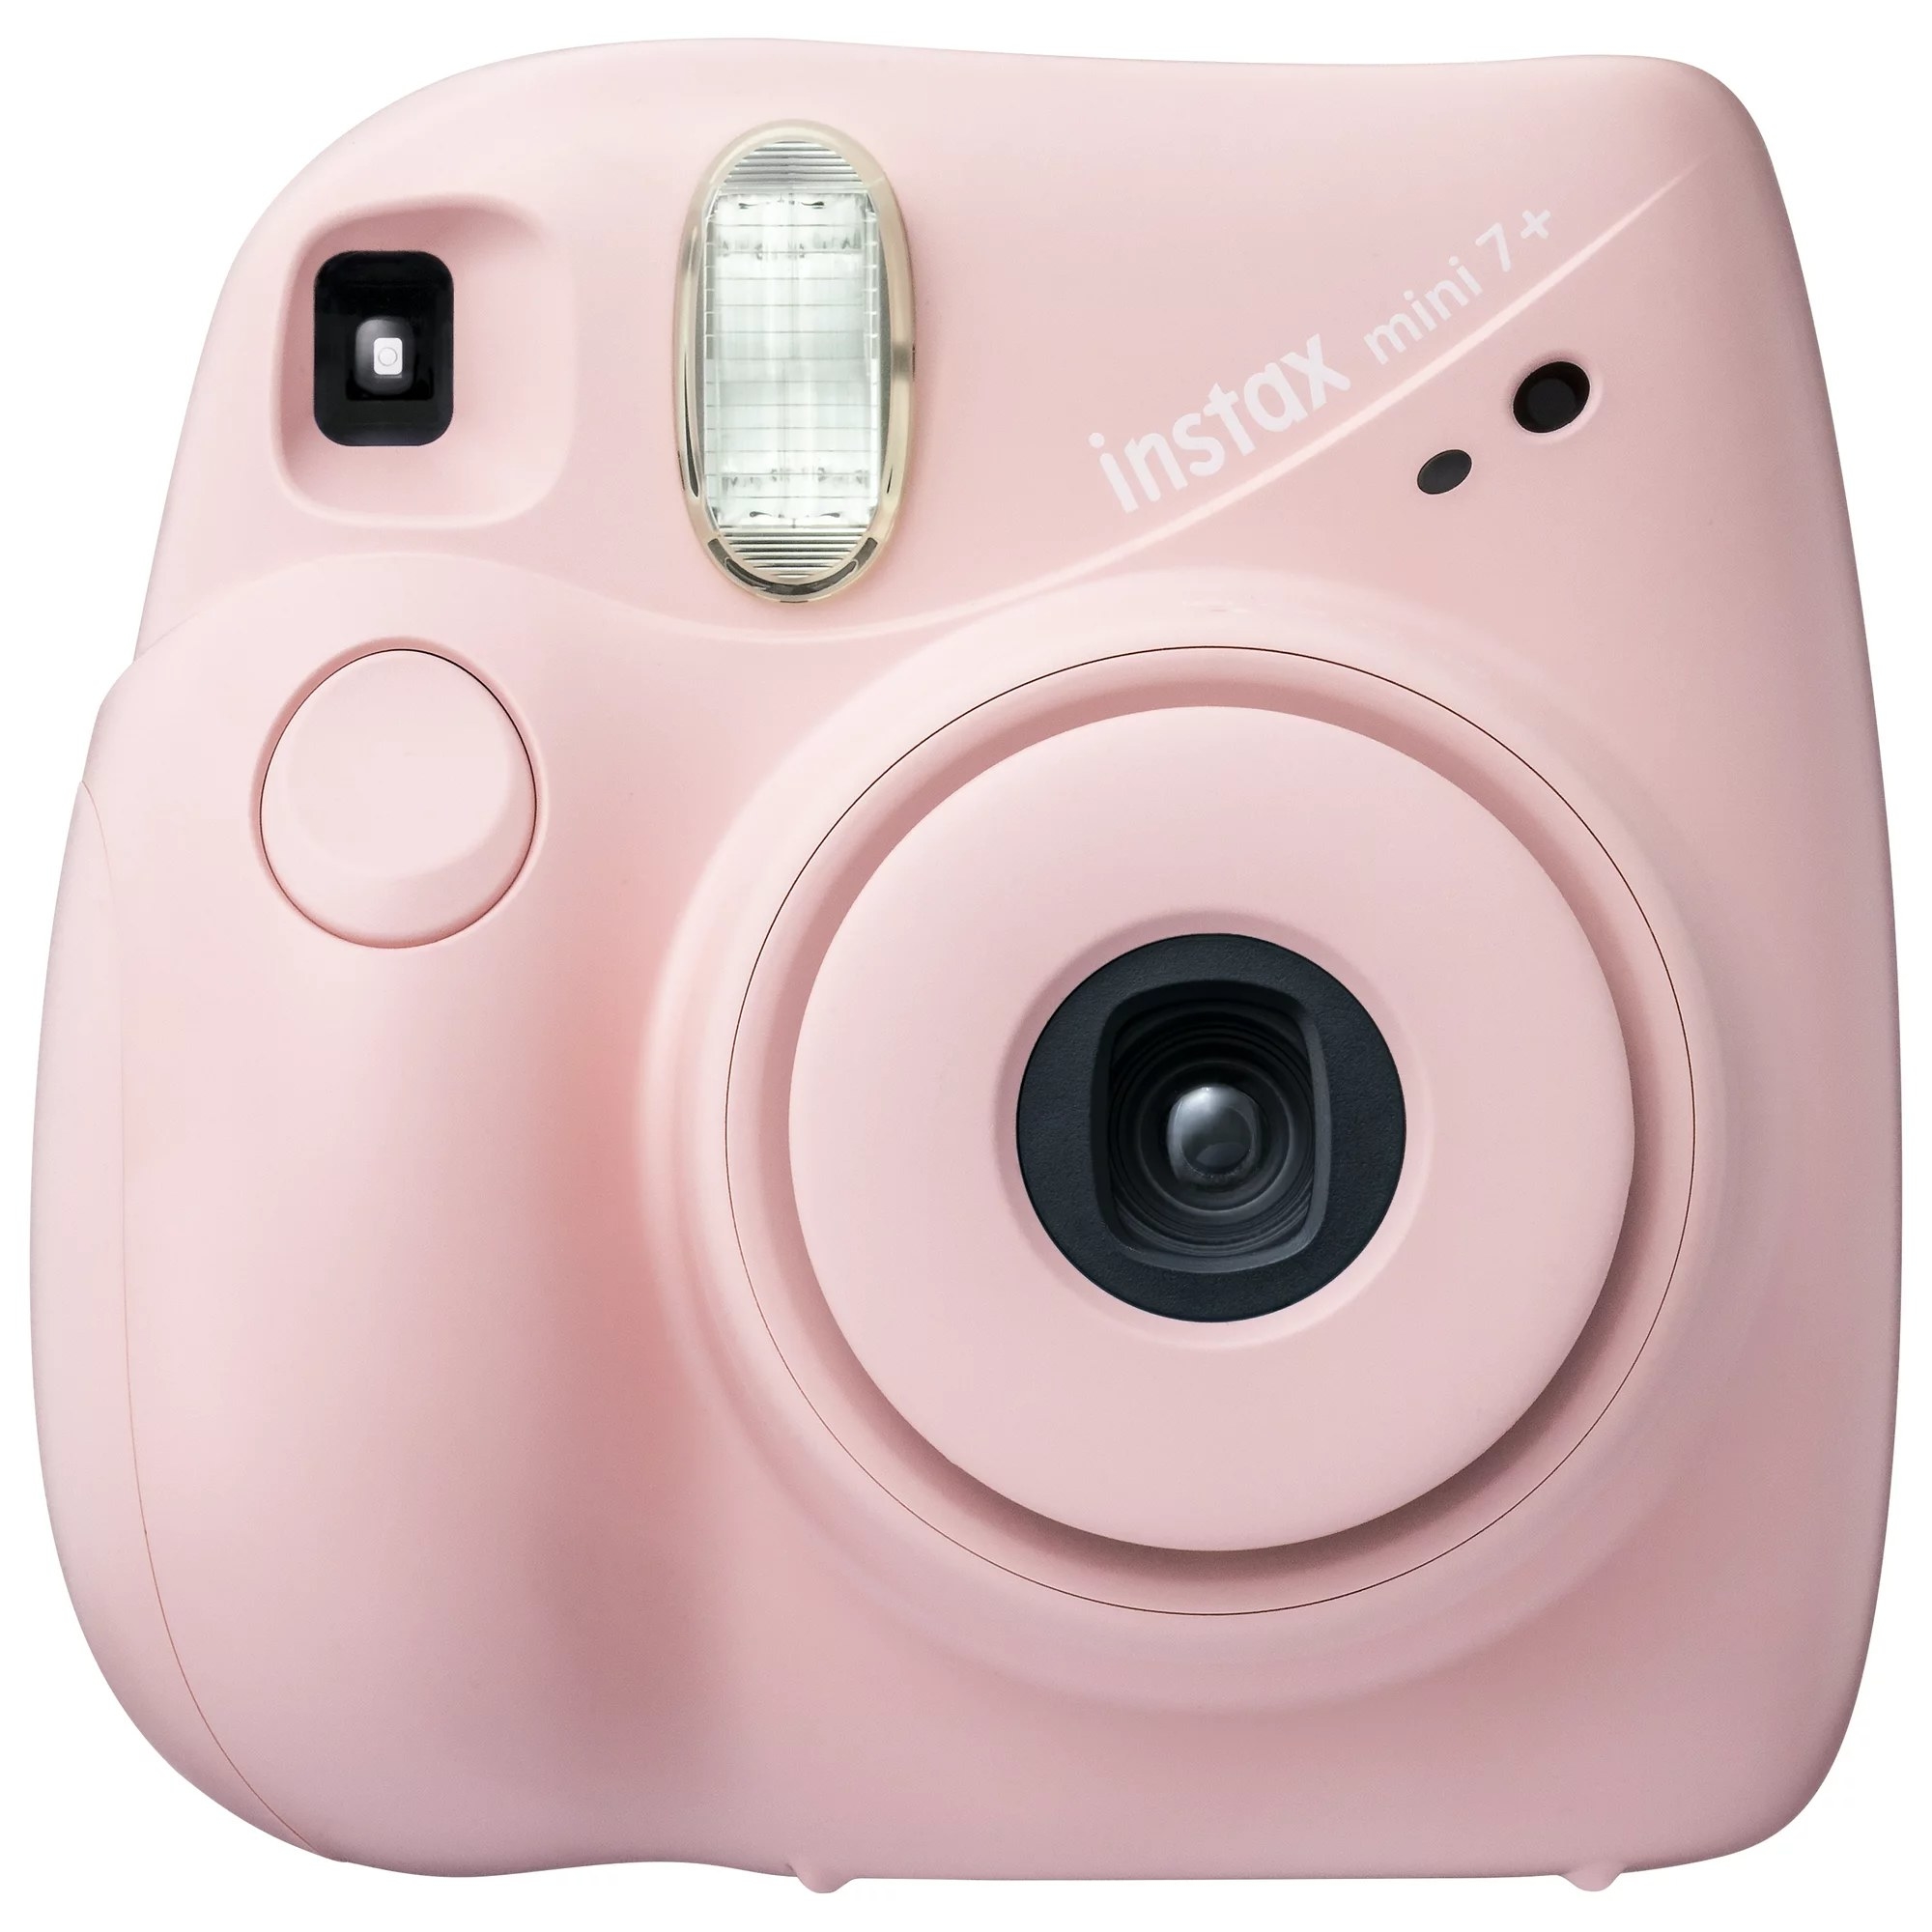 The INSTAX camera in the color Light Pink